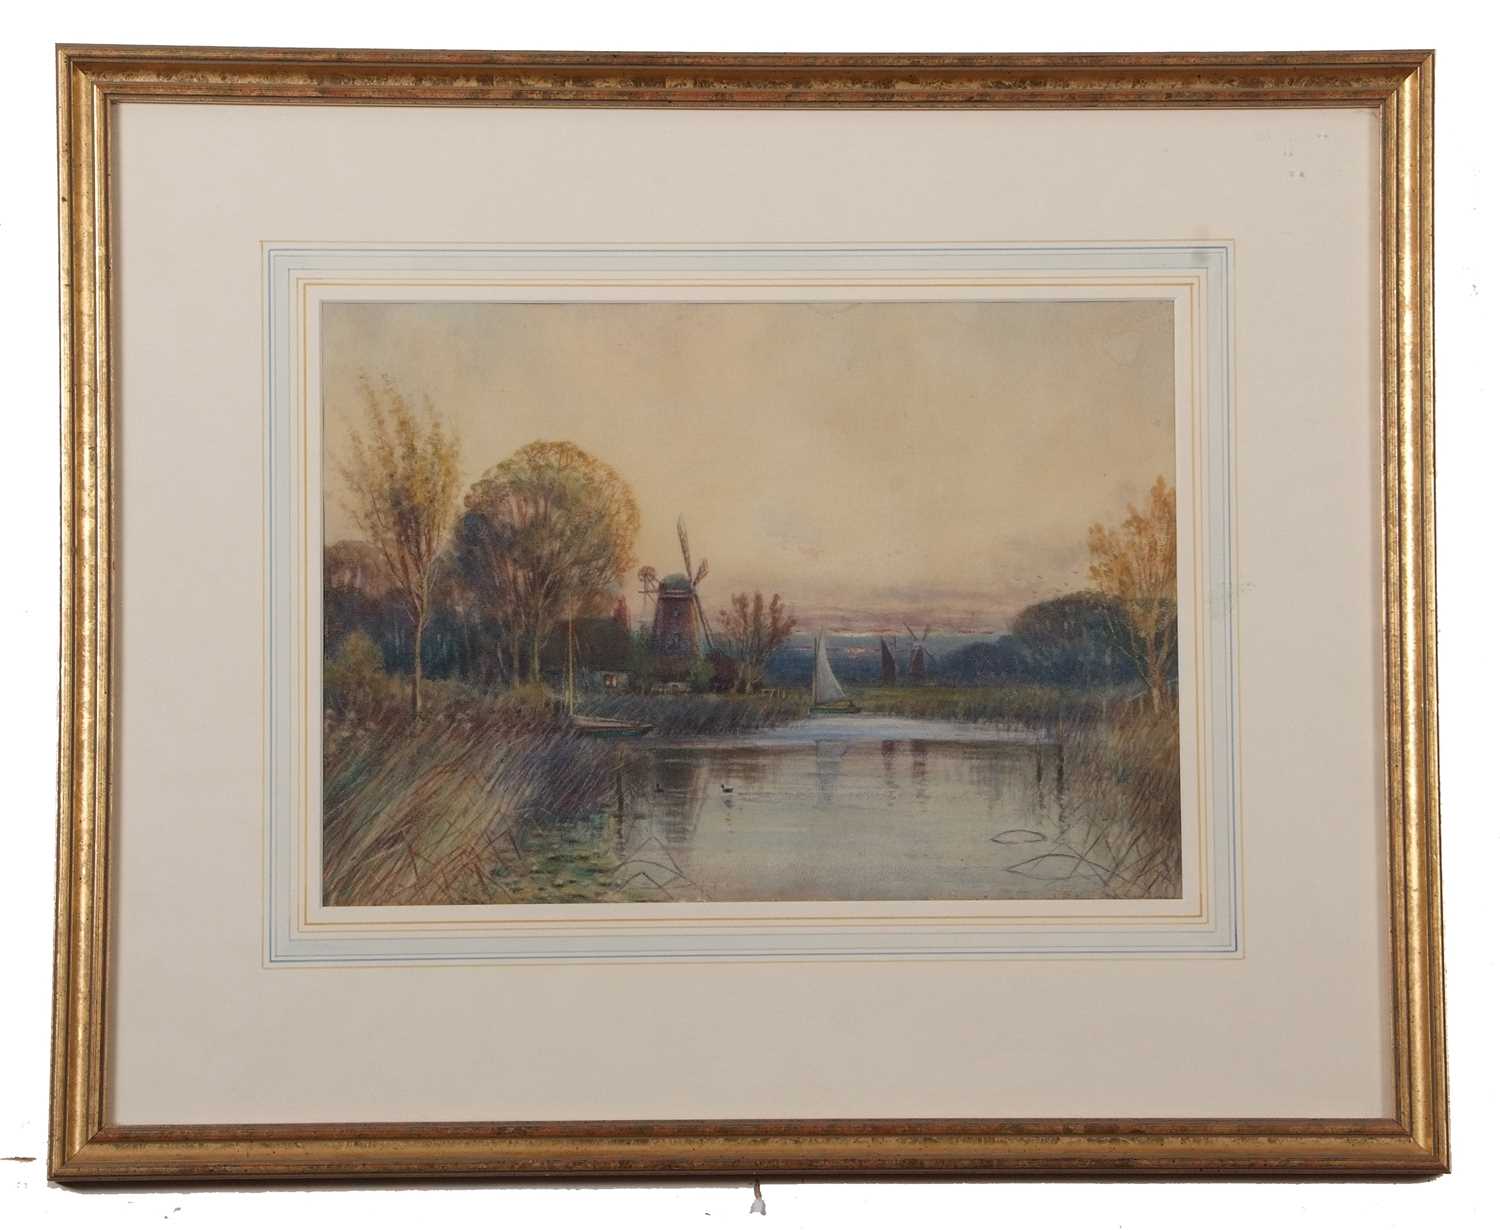 J.R. Goodman (British, b.1870), Norfolk Broads, watercolour, signed, 13.5x9.5ins, framed and - Image 2 of 2